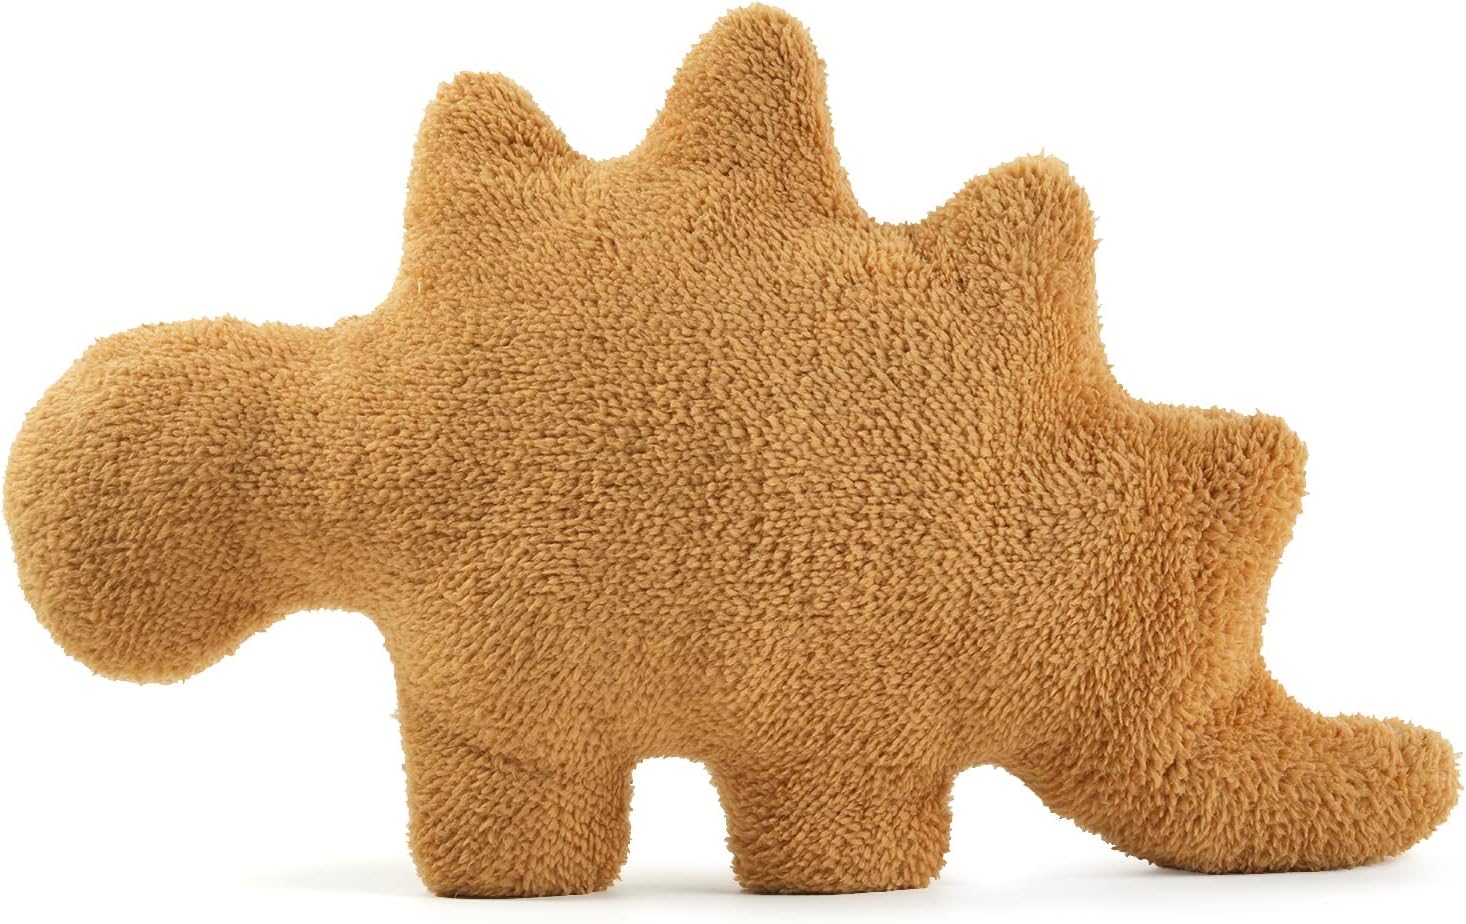 NXCHIZS Dino Nugget Pillow Review